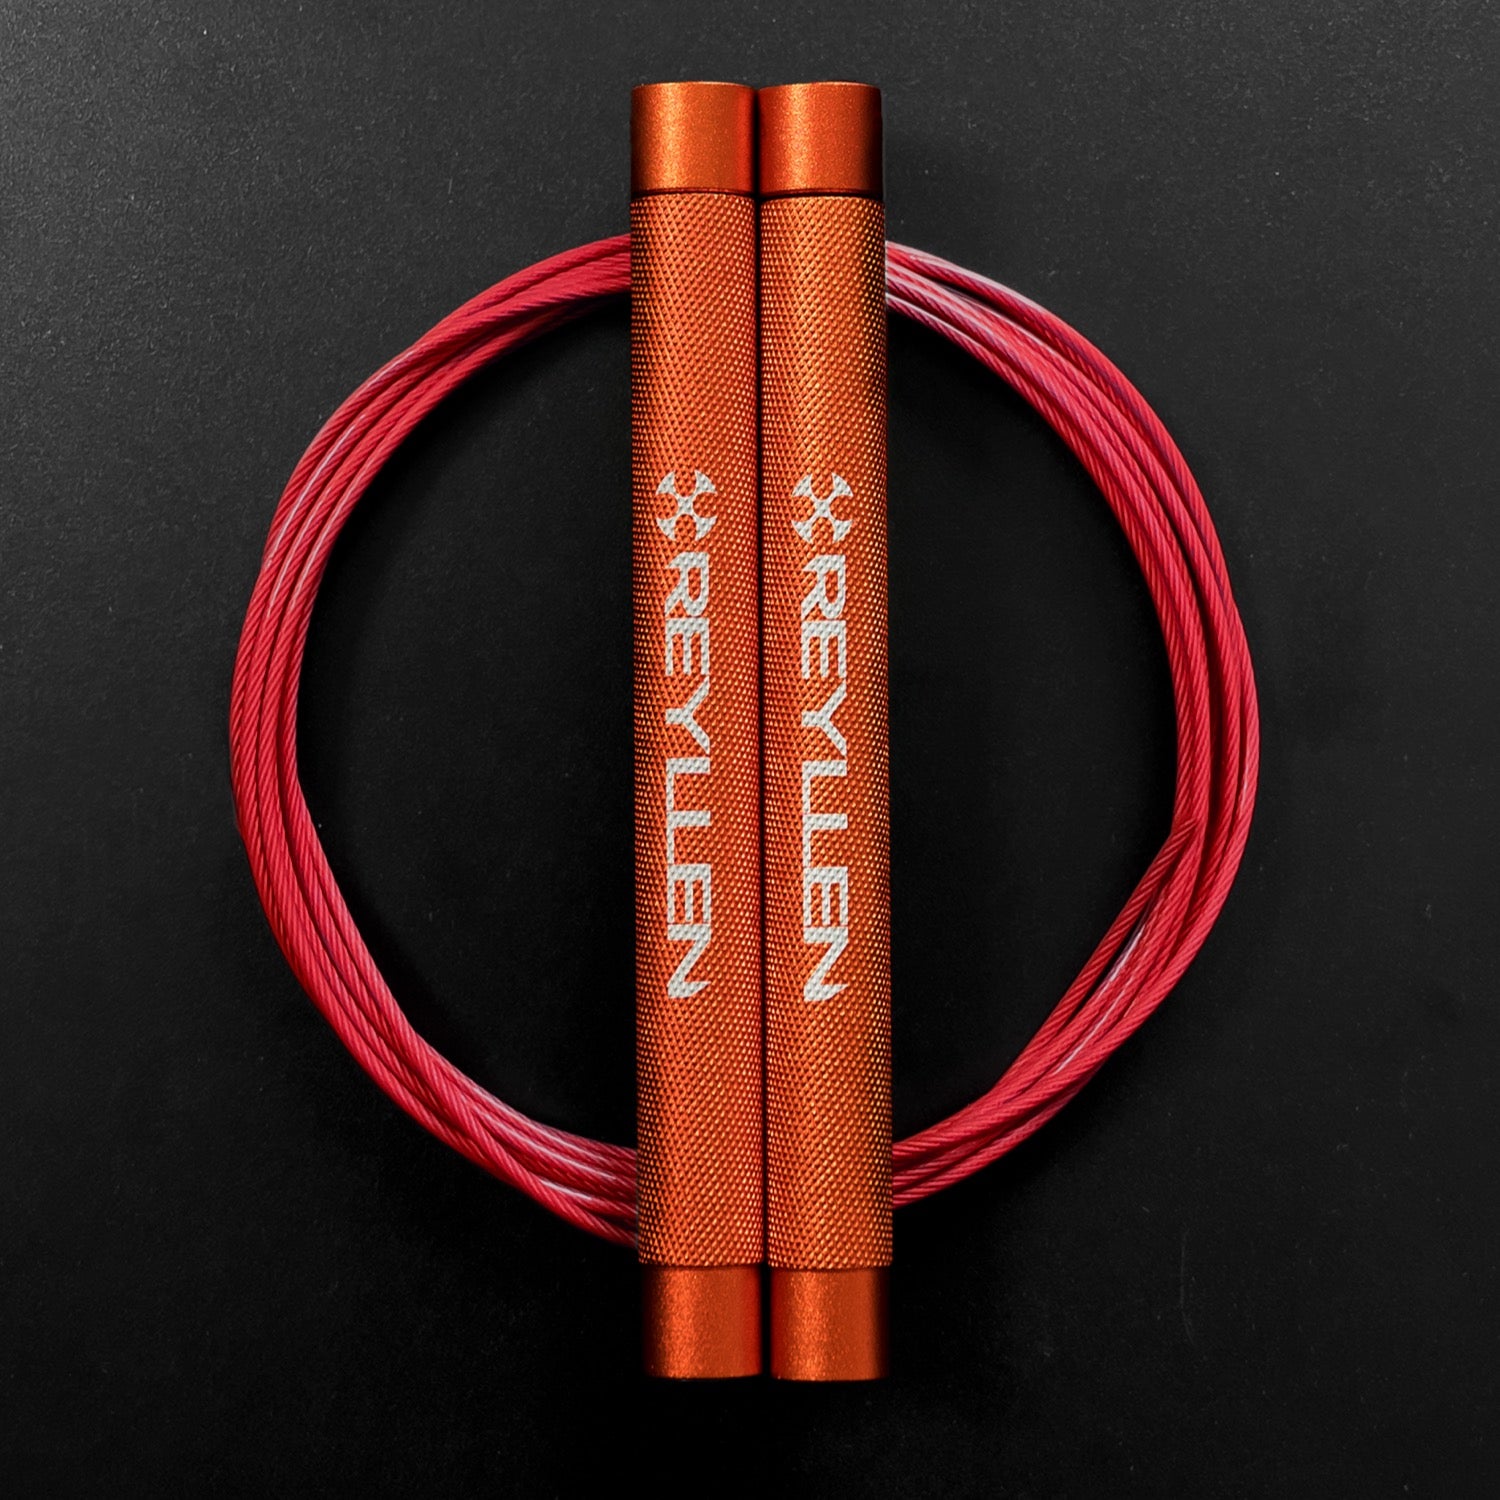 Reyllen Flare Mx Speed Skipping Jump Rope - Aluminium Handles - orange with red nylon coated cable